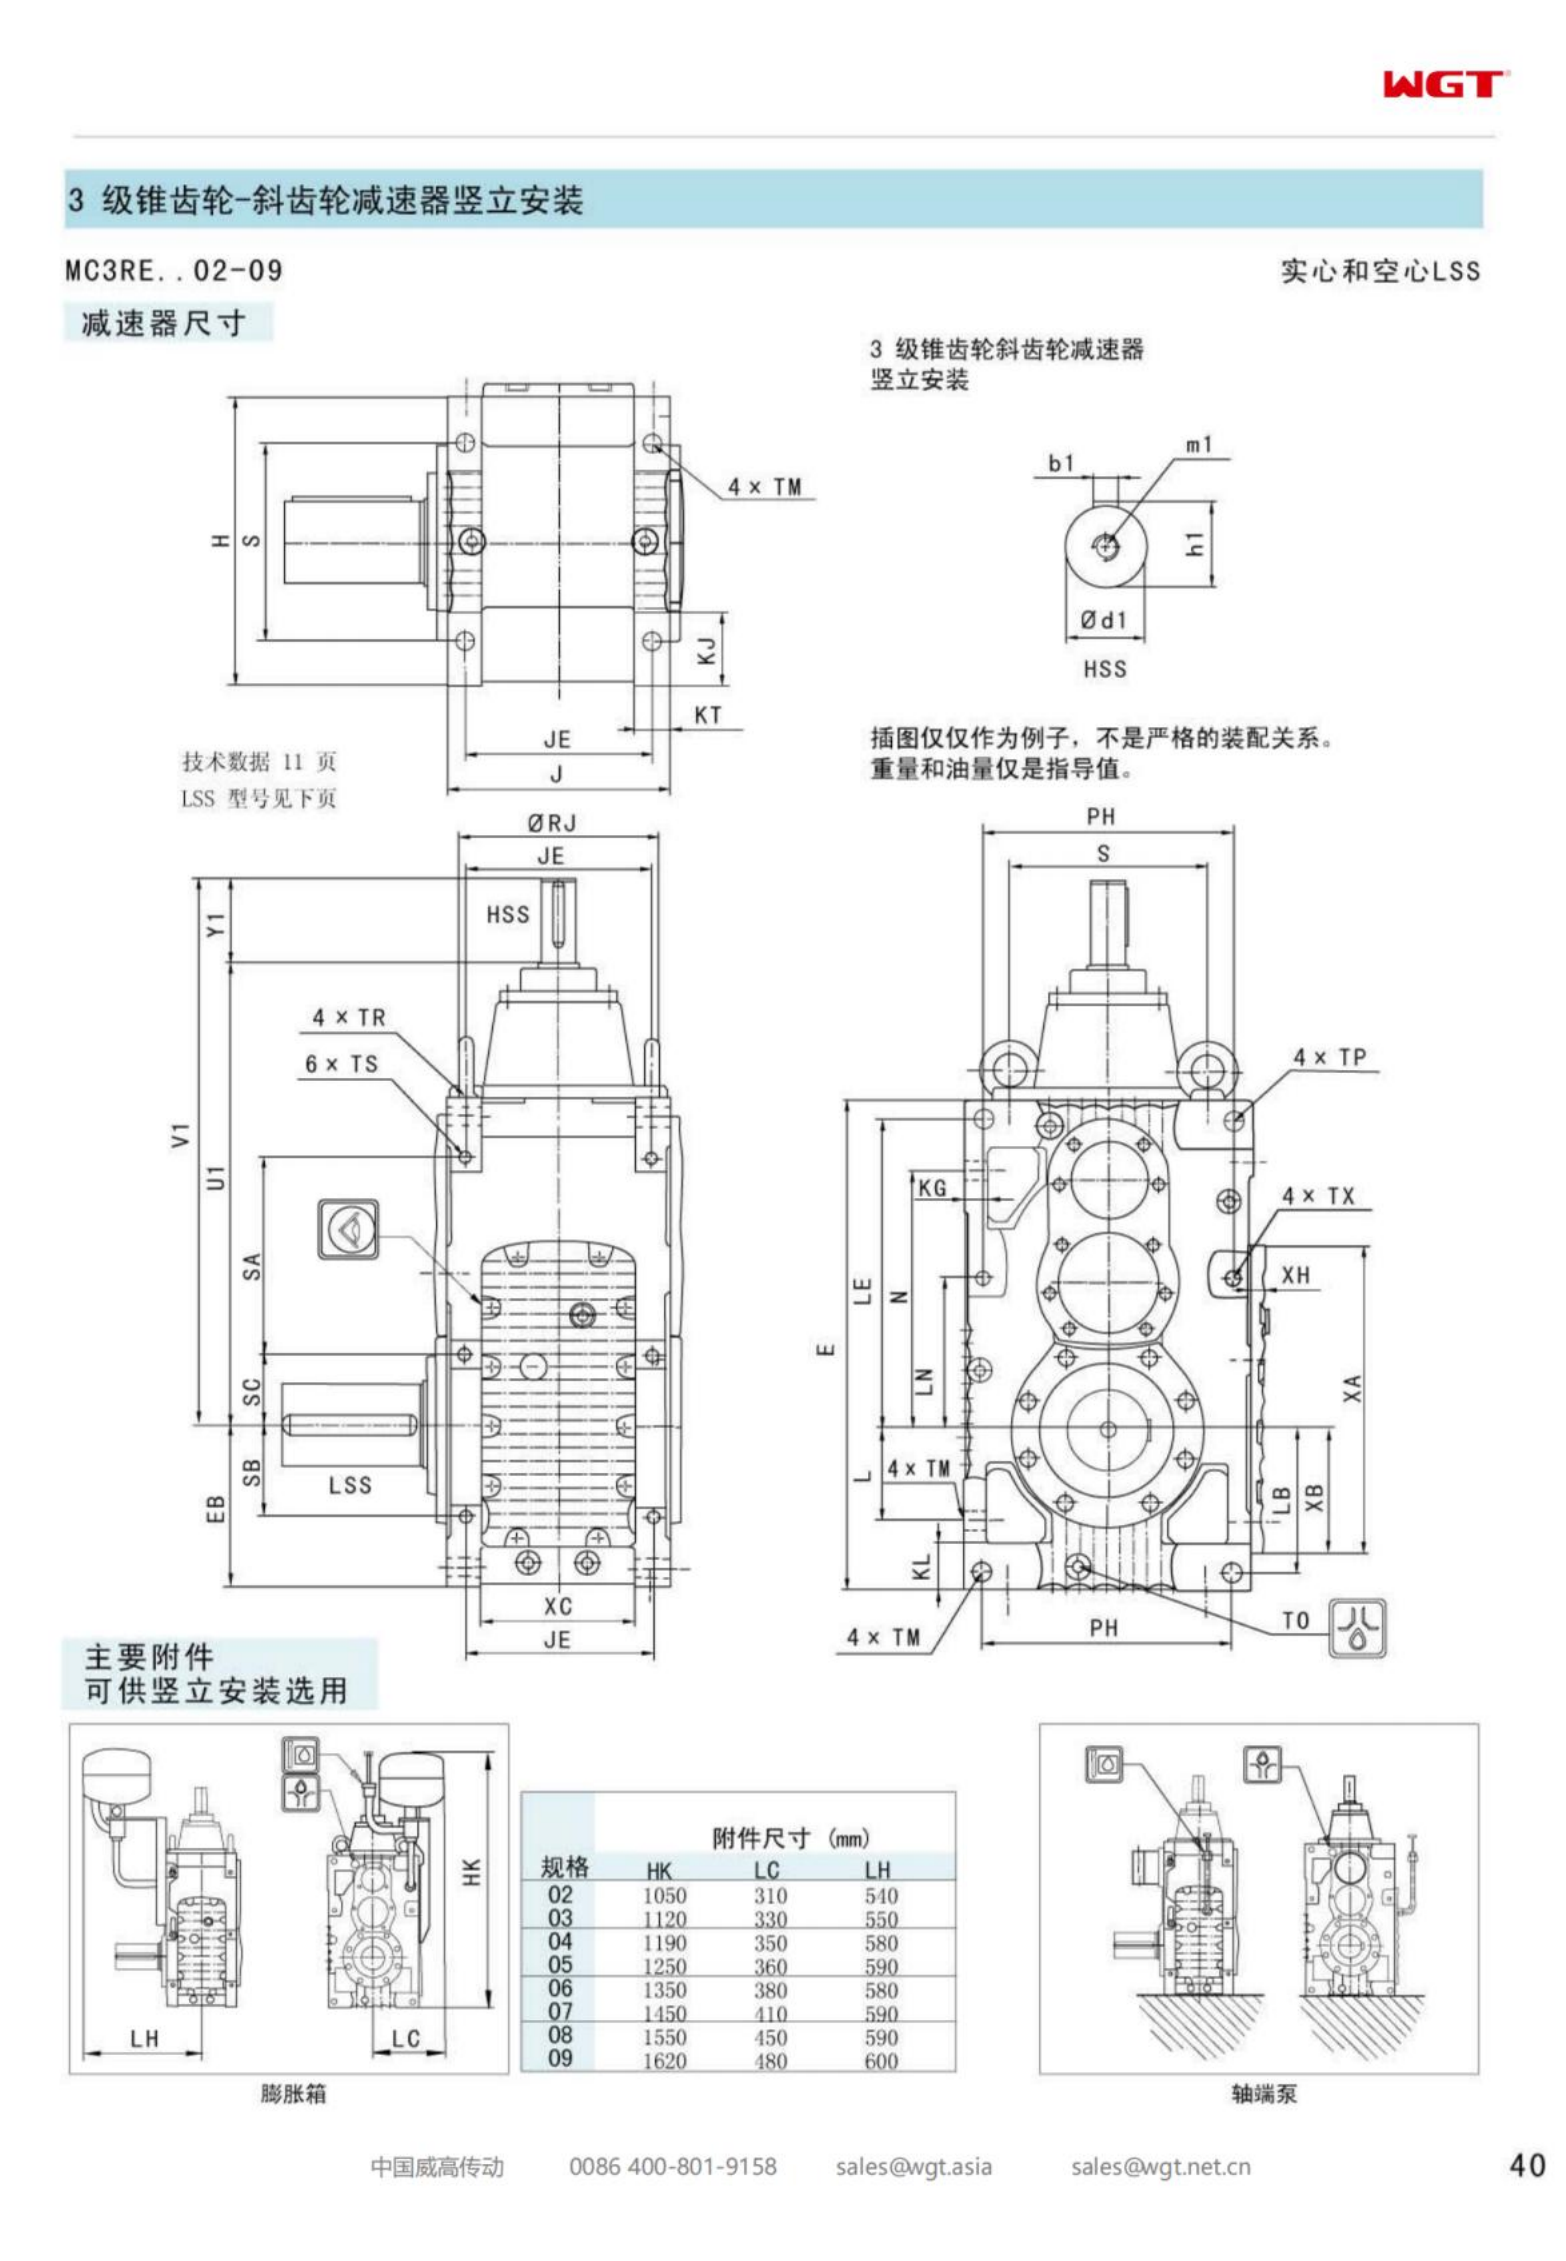 MC3RESF07 Replace_SEW_MC_Series Gearbox